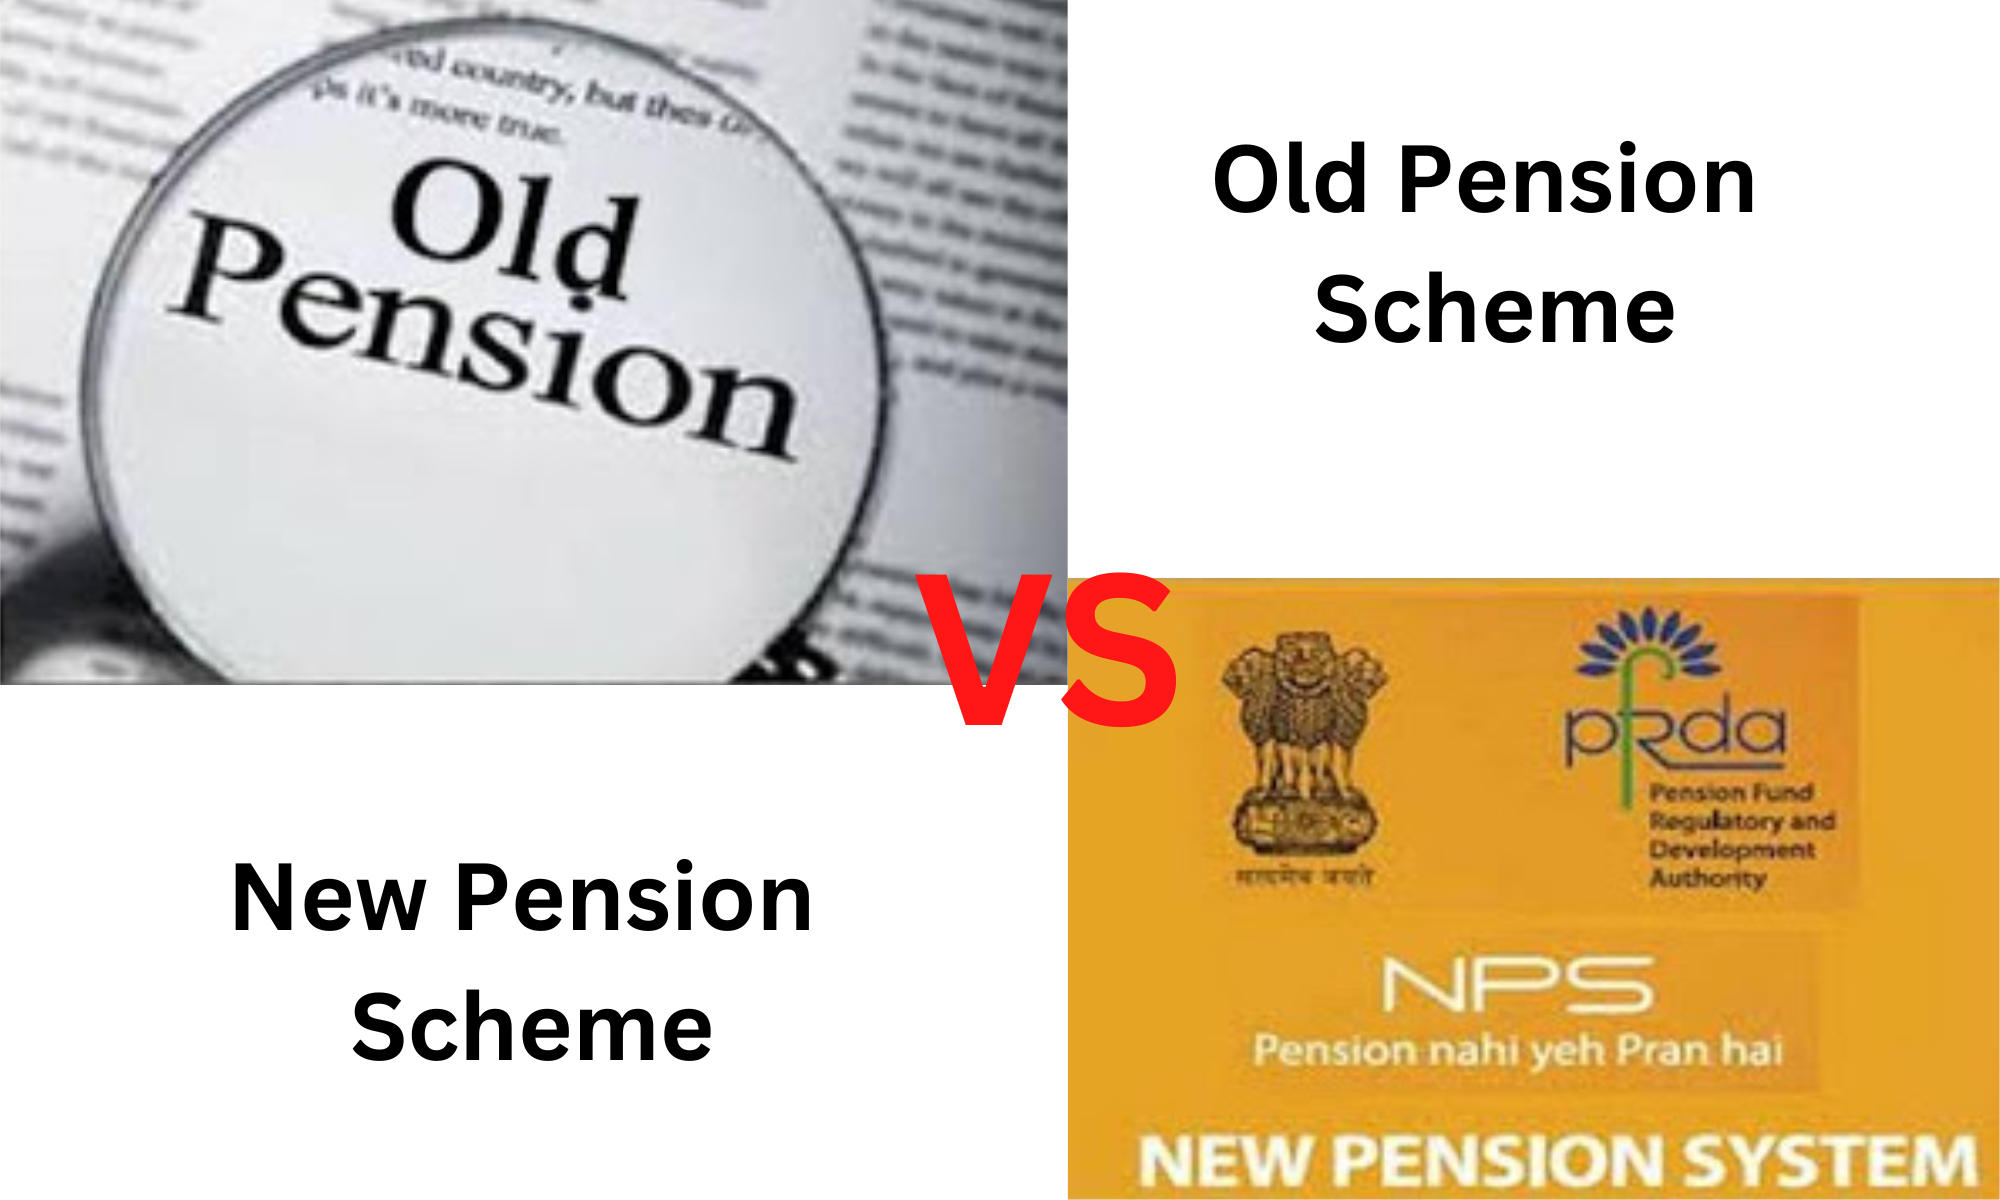 New pension scheme vs old pension scheme, Find out which is better?